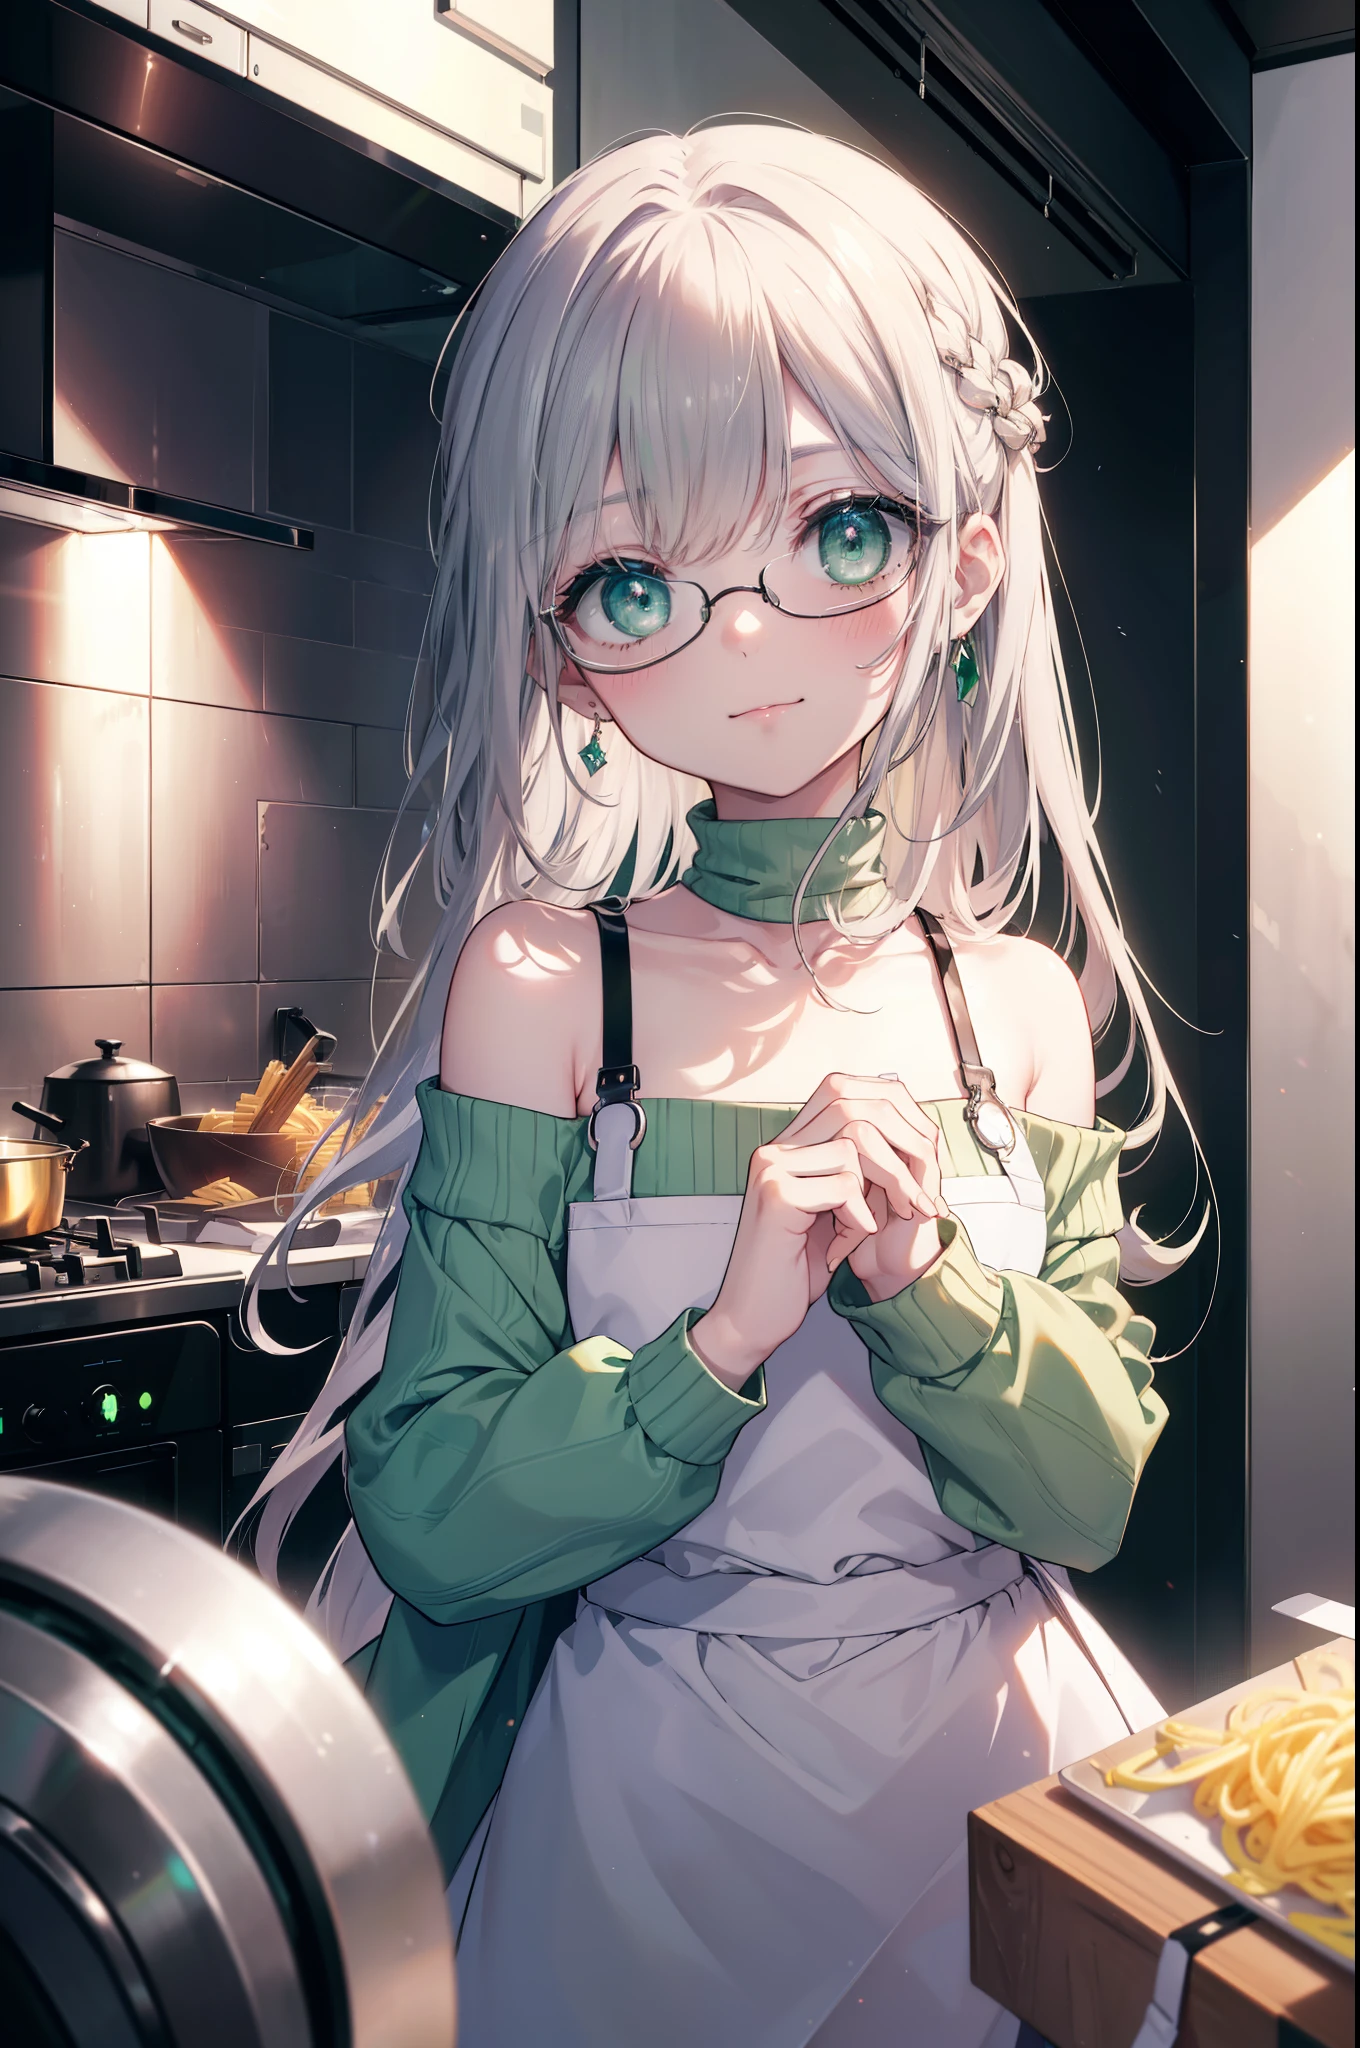 index, index, (green eyes:1.5), silver hair, long hair, (flat chest:1.2),smile,blush,off shoulder sweater,bare shoulders,bare clavicle,bare neck pink apron,skinny pants,Black Abyss Glasses,kitchen,Boil the pasta in a frying pan,
break looking at viewer, Upper body, whole body,
break indoors, kitchen,kitchen,
break (masterpiece:1.2), highest quality, High resolution, unity 8k wallpaper, (shape:0.8), (beautiful and detailed eyes:1.6), highly detailed face, perfect lighting, Very detailed CG, (perfect hands, perfect anatomy),